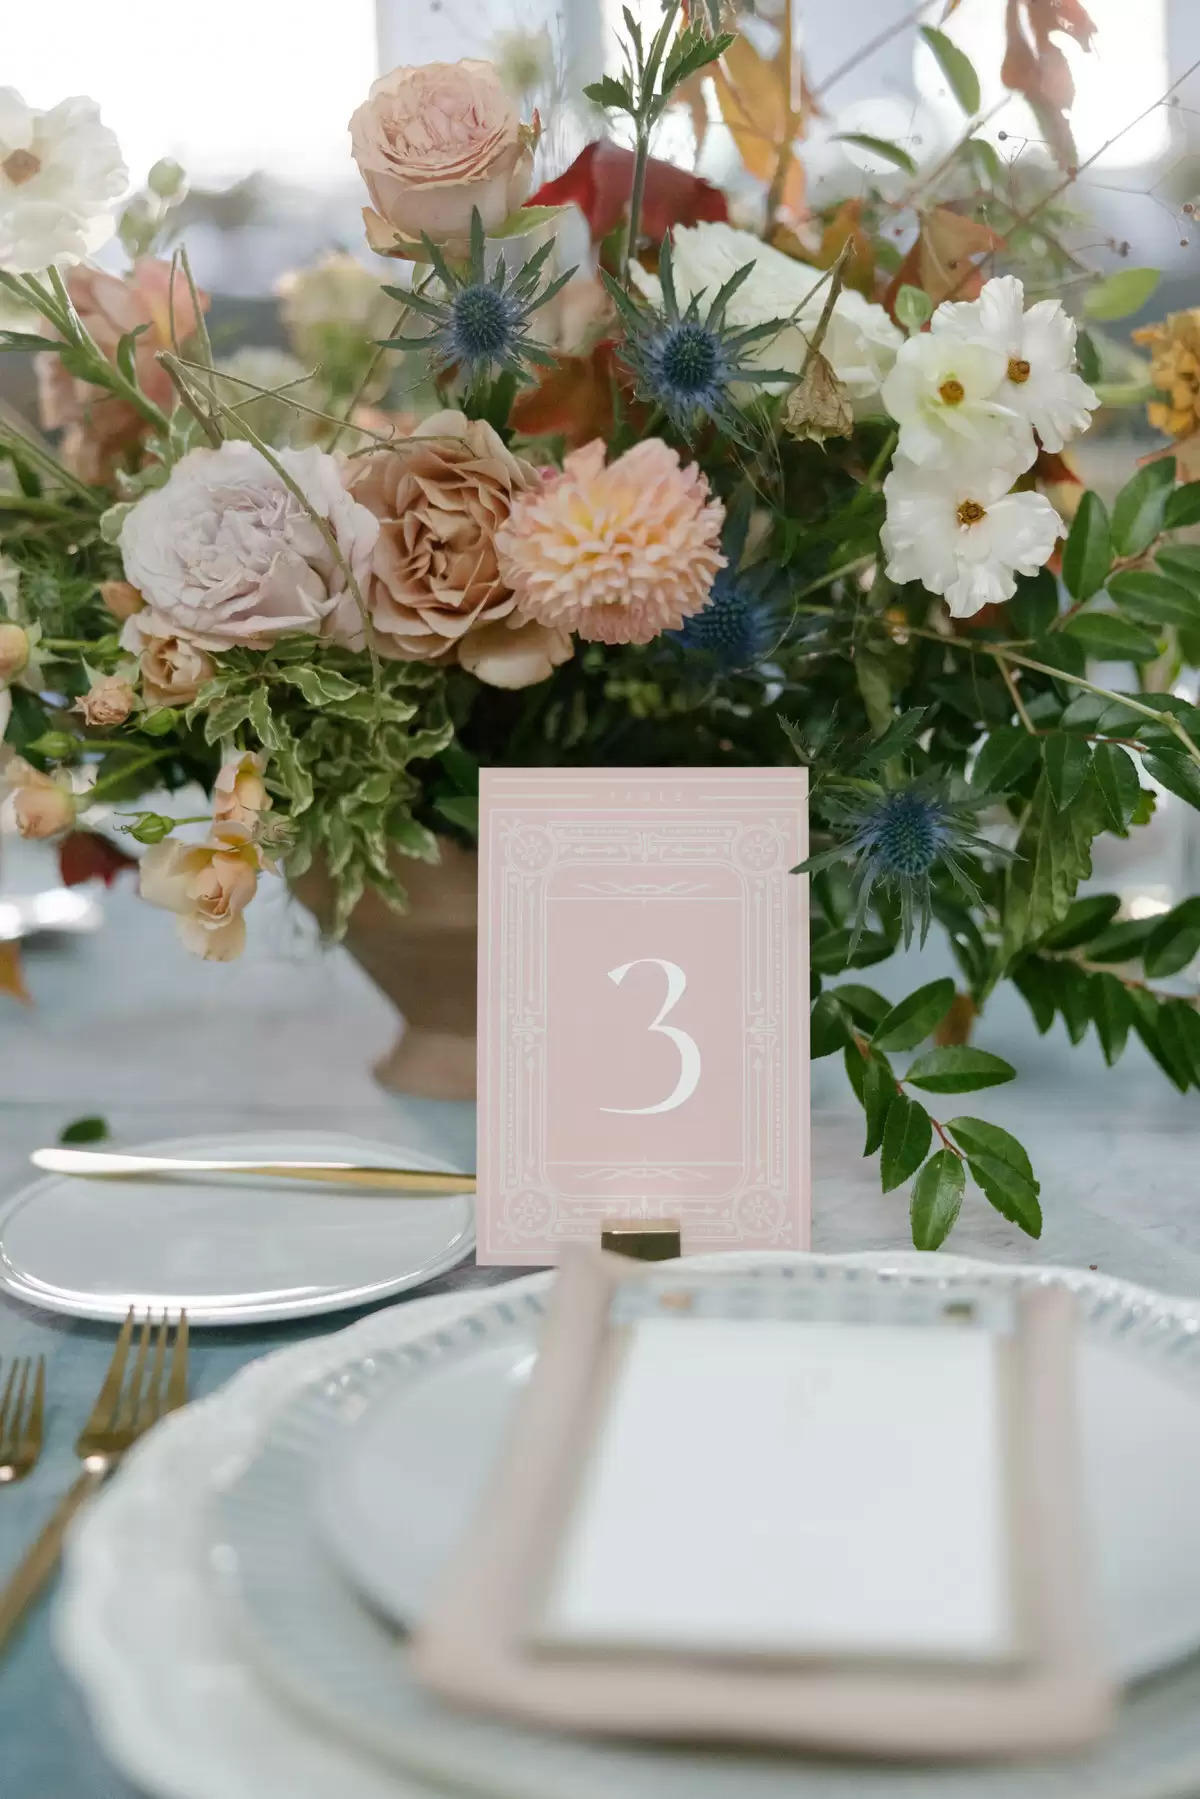 Monogram Magic In This Textural & Earthy Marriage ceremony With Elevated North Carolina Aptitude ⋆ Ruffled